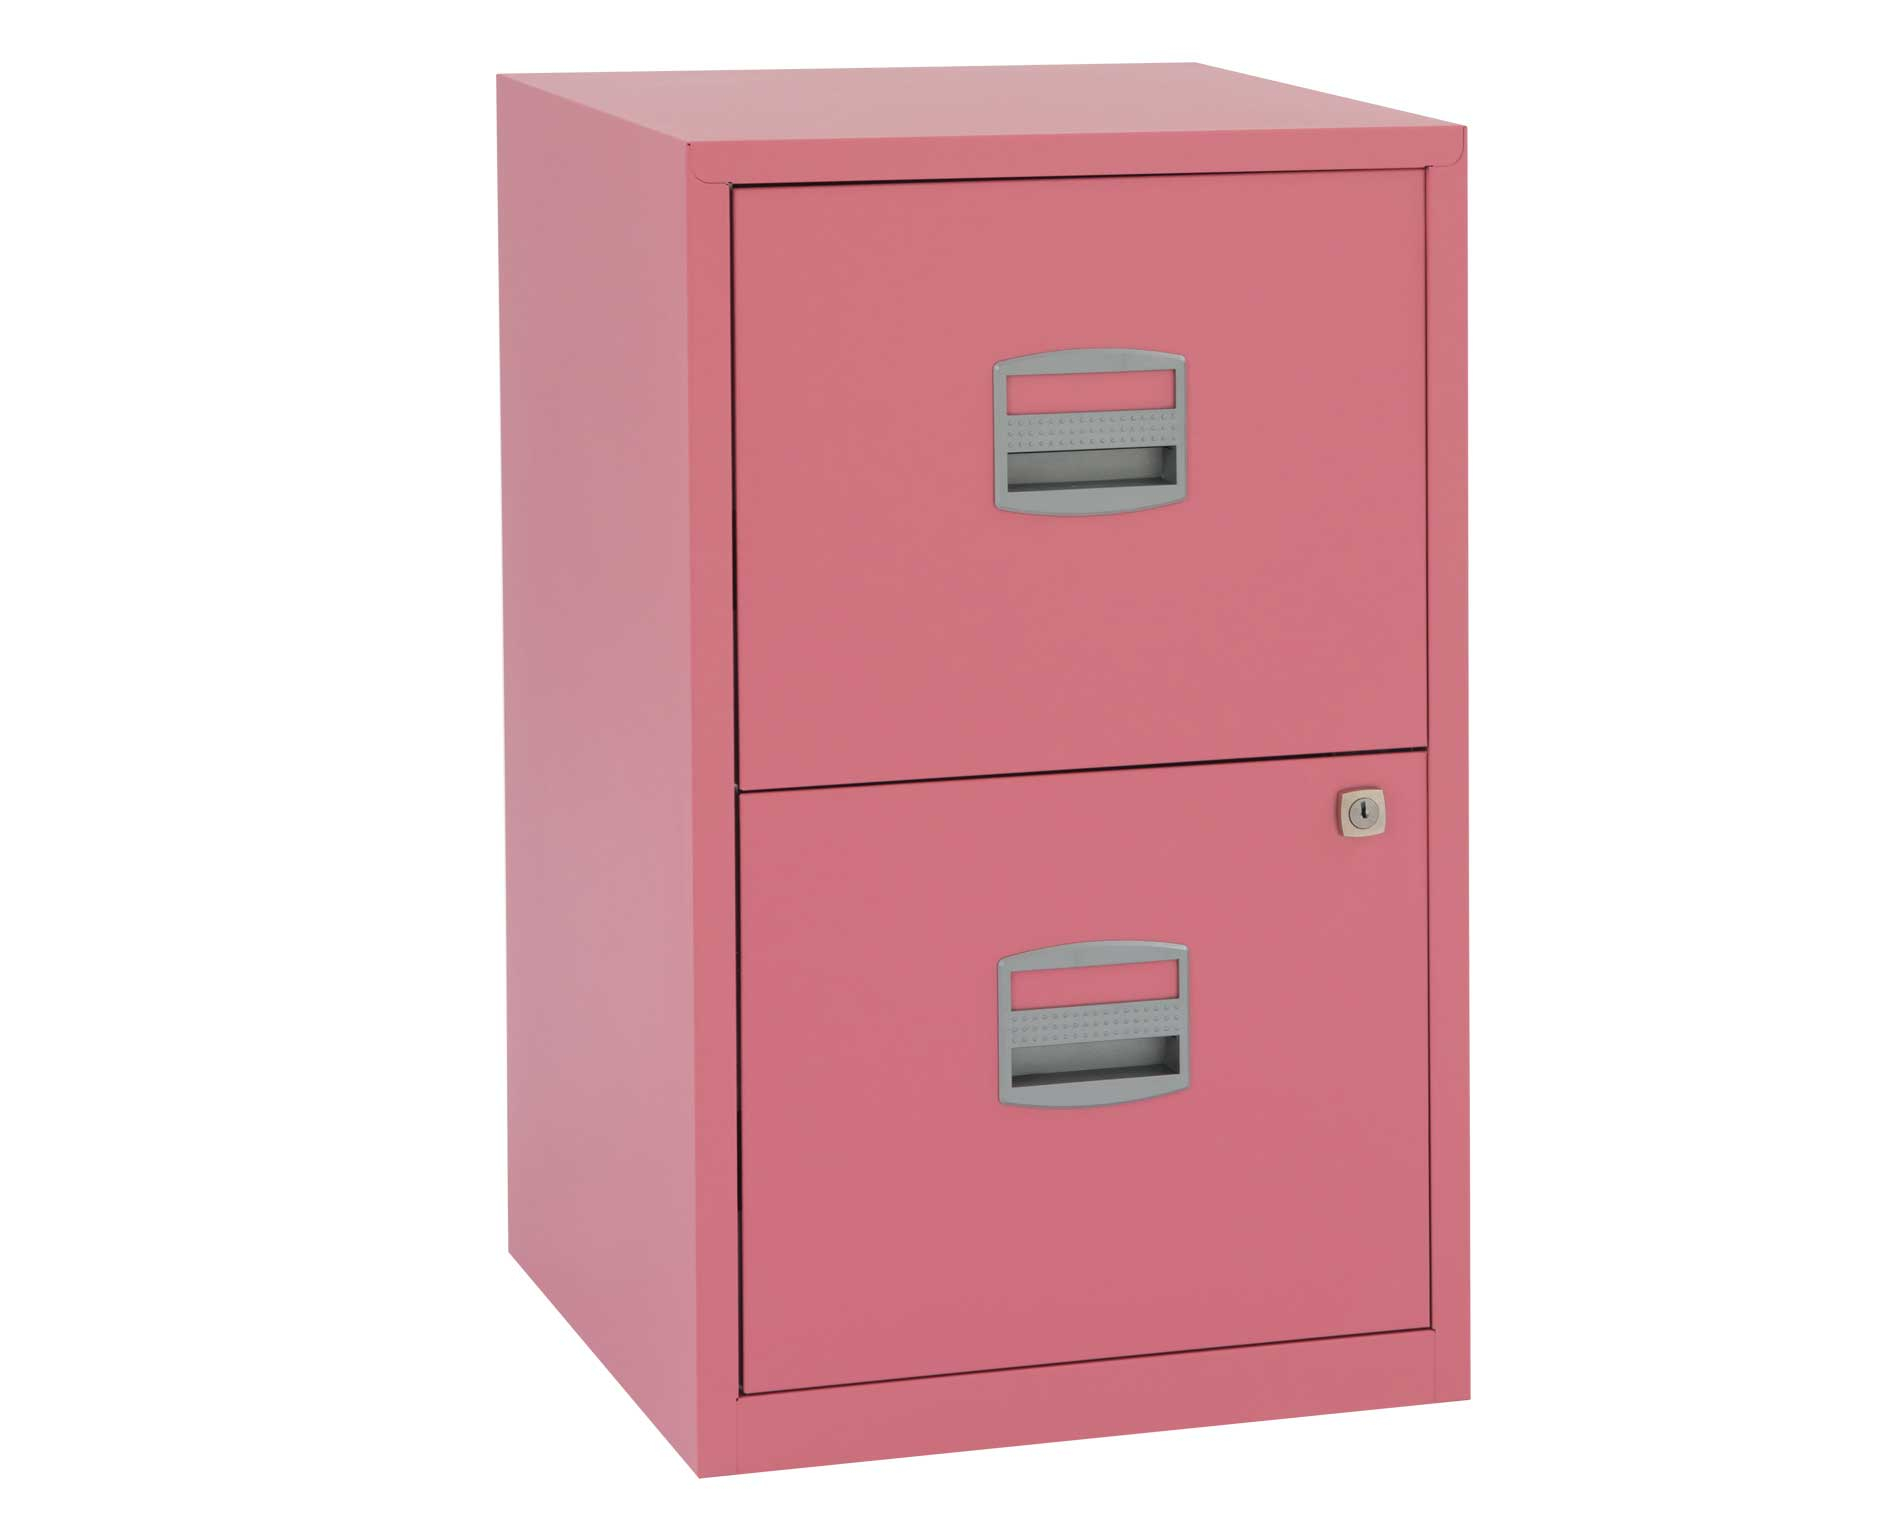 Pink Filing Cabinets Storage Shelving Furniture Storage Ryman intended for sizing 1890 X 1540